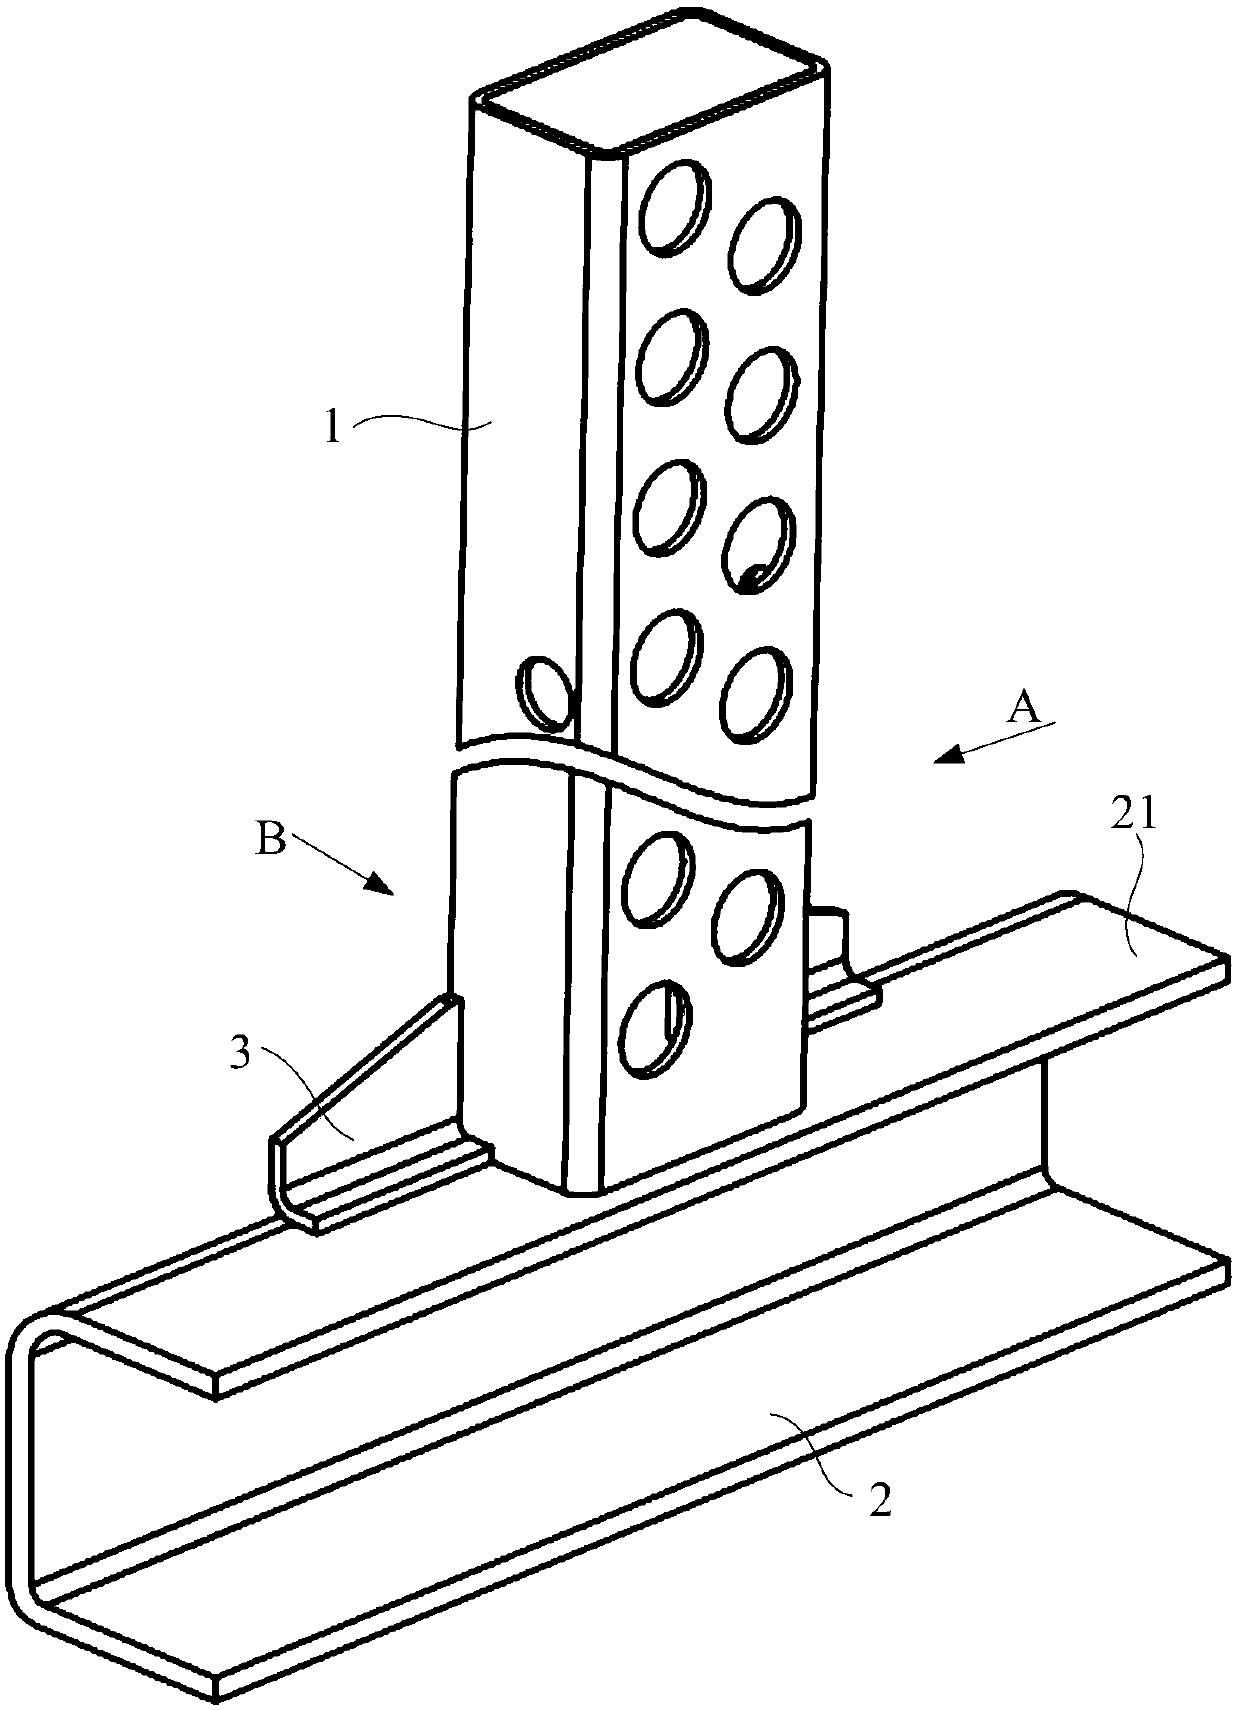 Connecting structure of side wall stand column and underframe boundary beam, vehicle body and rail vehicle